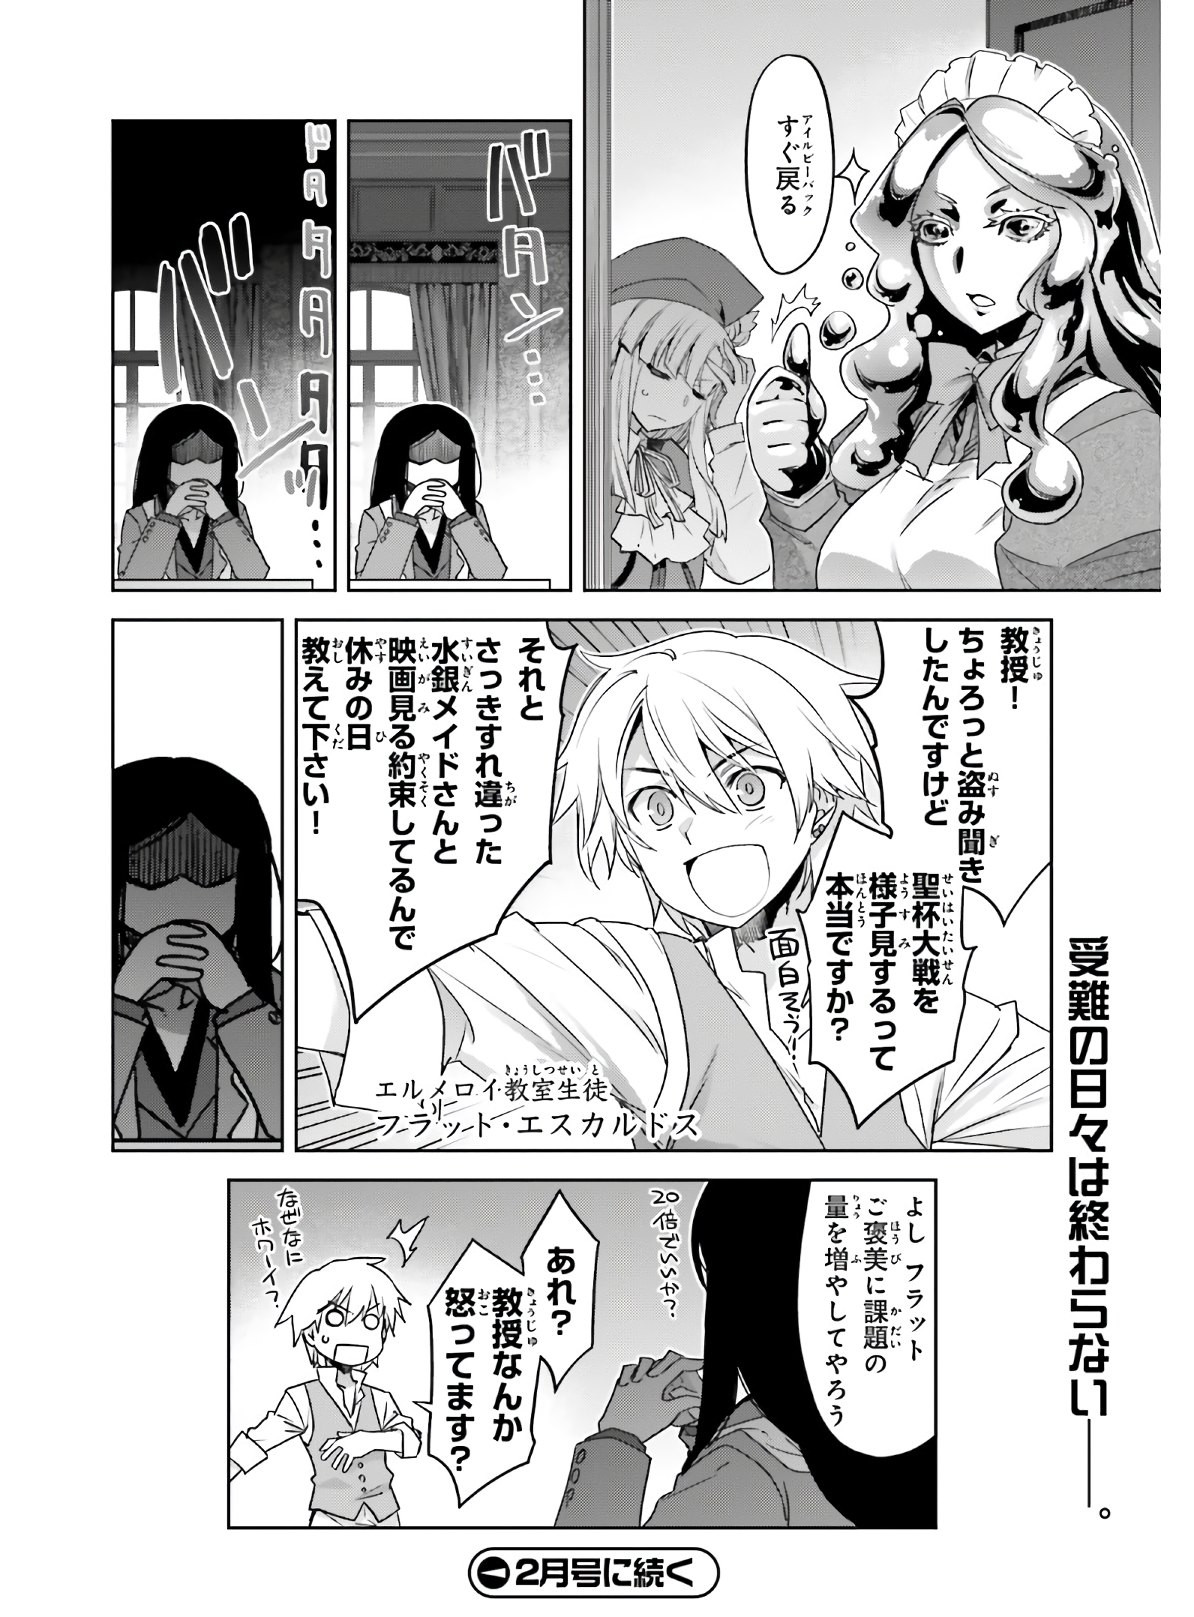 Fate-Apocrypha - Chapter 45-2 - Page 28